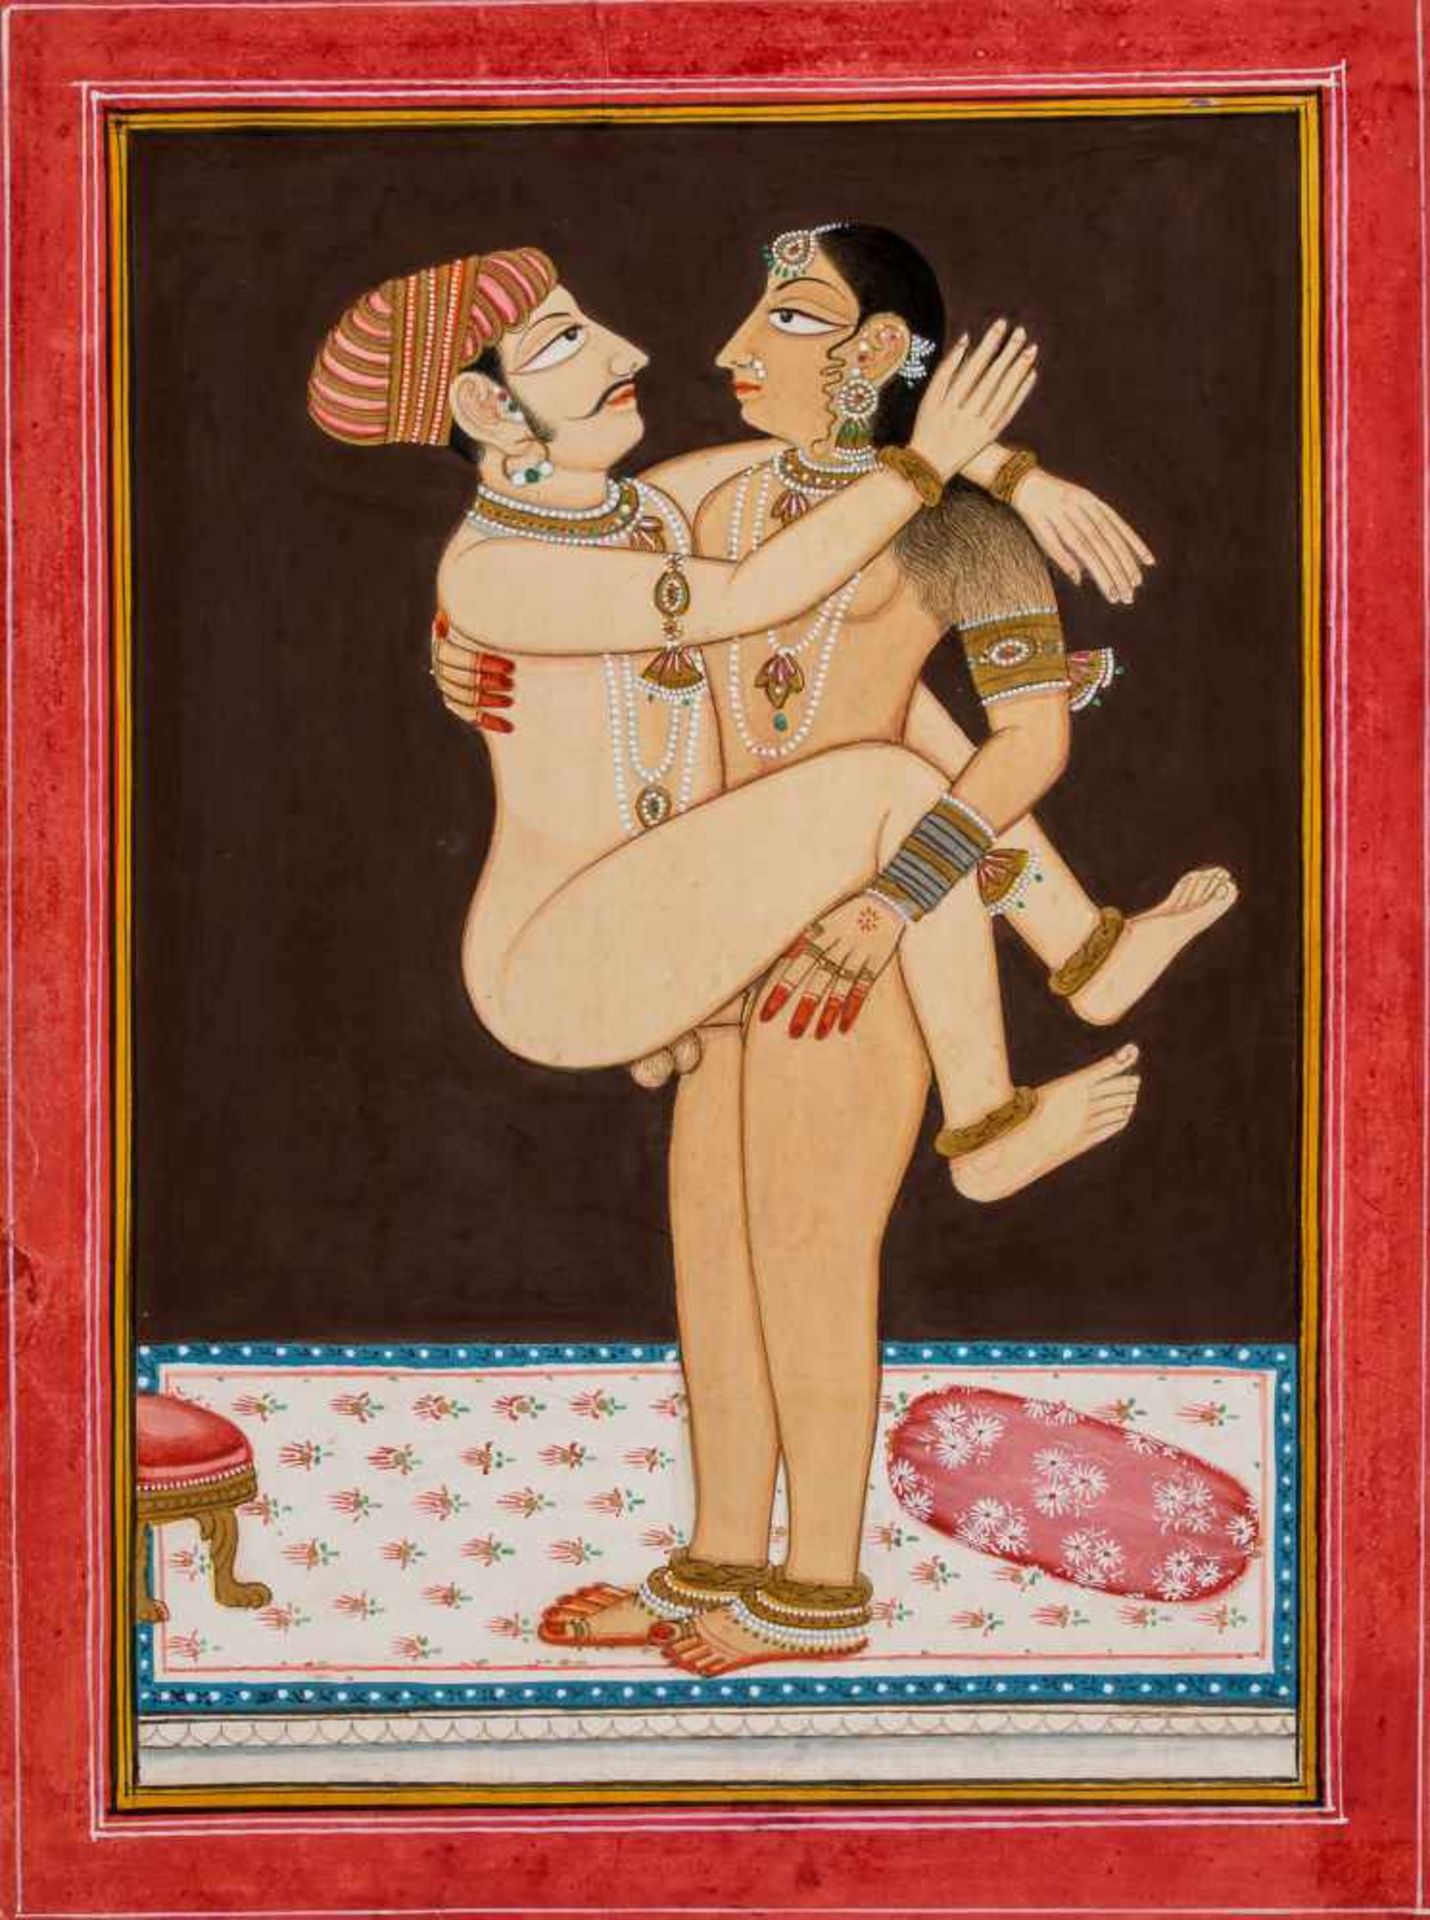 AN EROTIC INDIAN PAINTING - 19TH – EARLY 20th CENTURY Gouache and gold paint on paperIndia, late